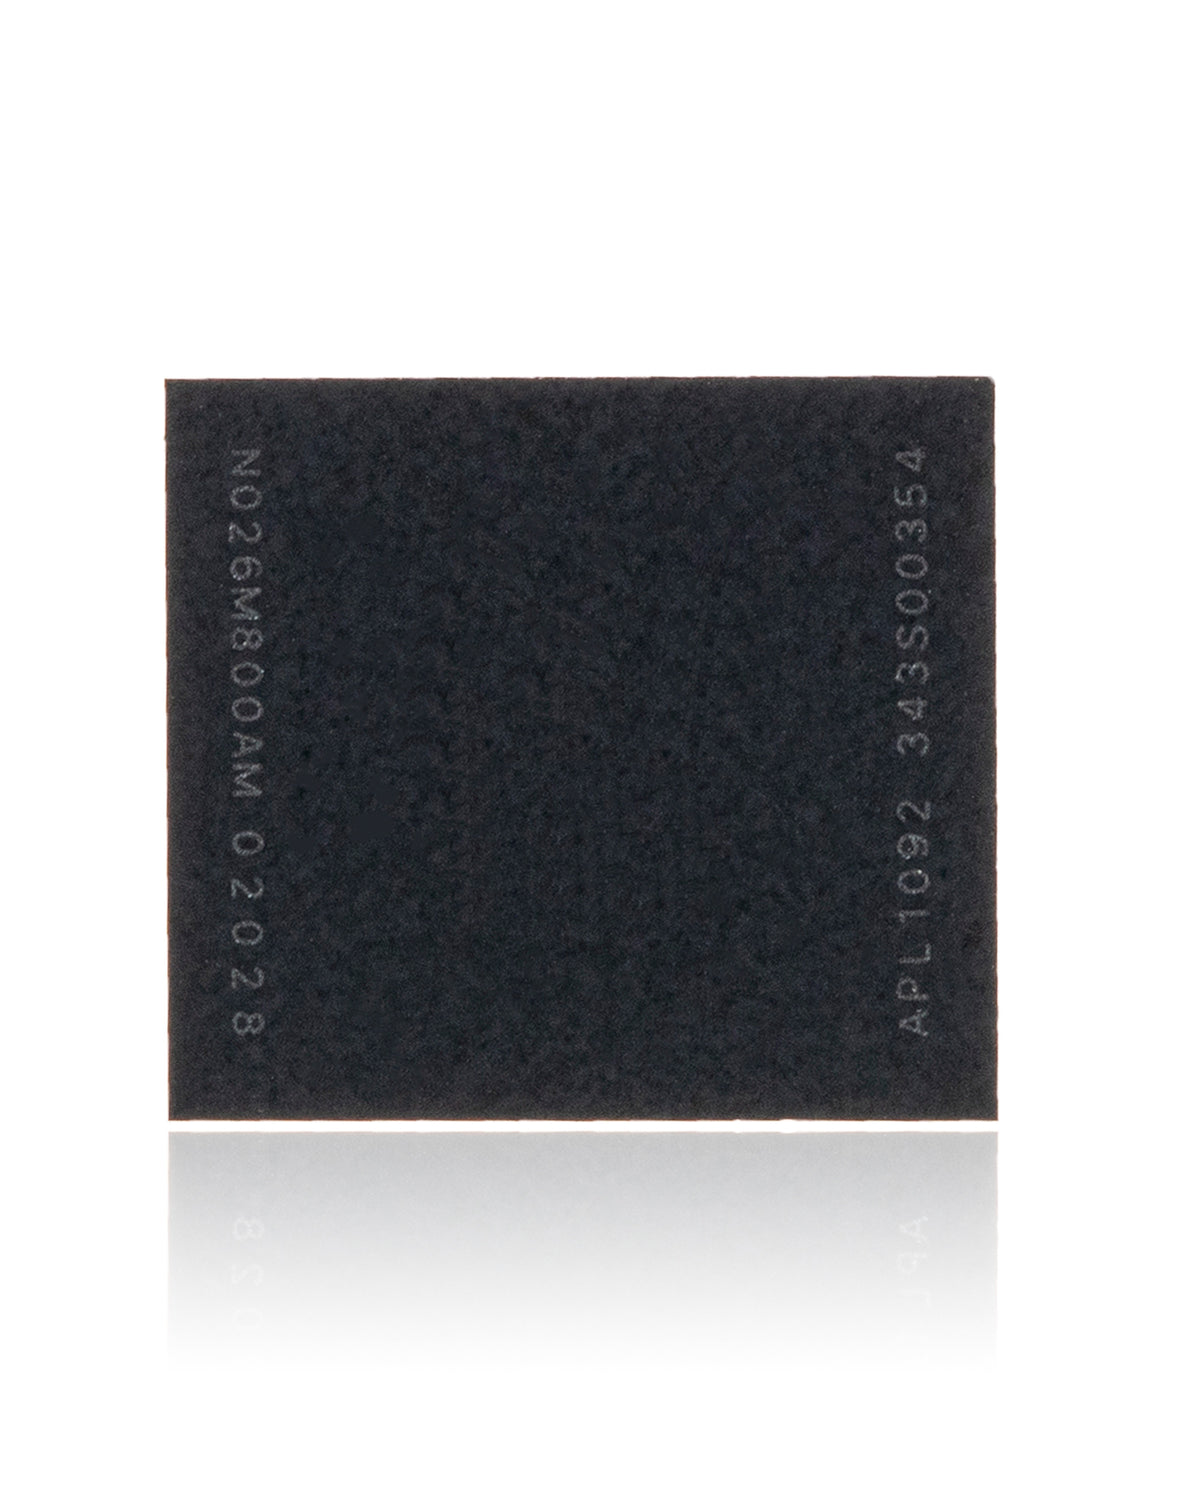 POWER MANAGEMENT IC COMPATIBLE WITH IPHONE 11 / 11 PRO / 11 PRO MAX (343S00354)